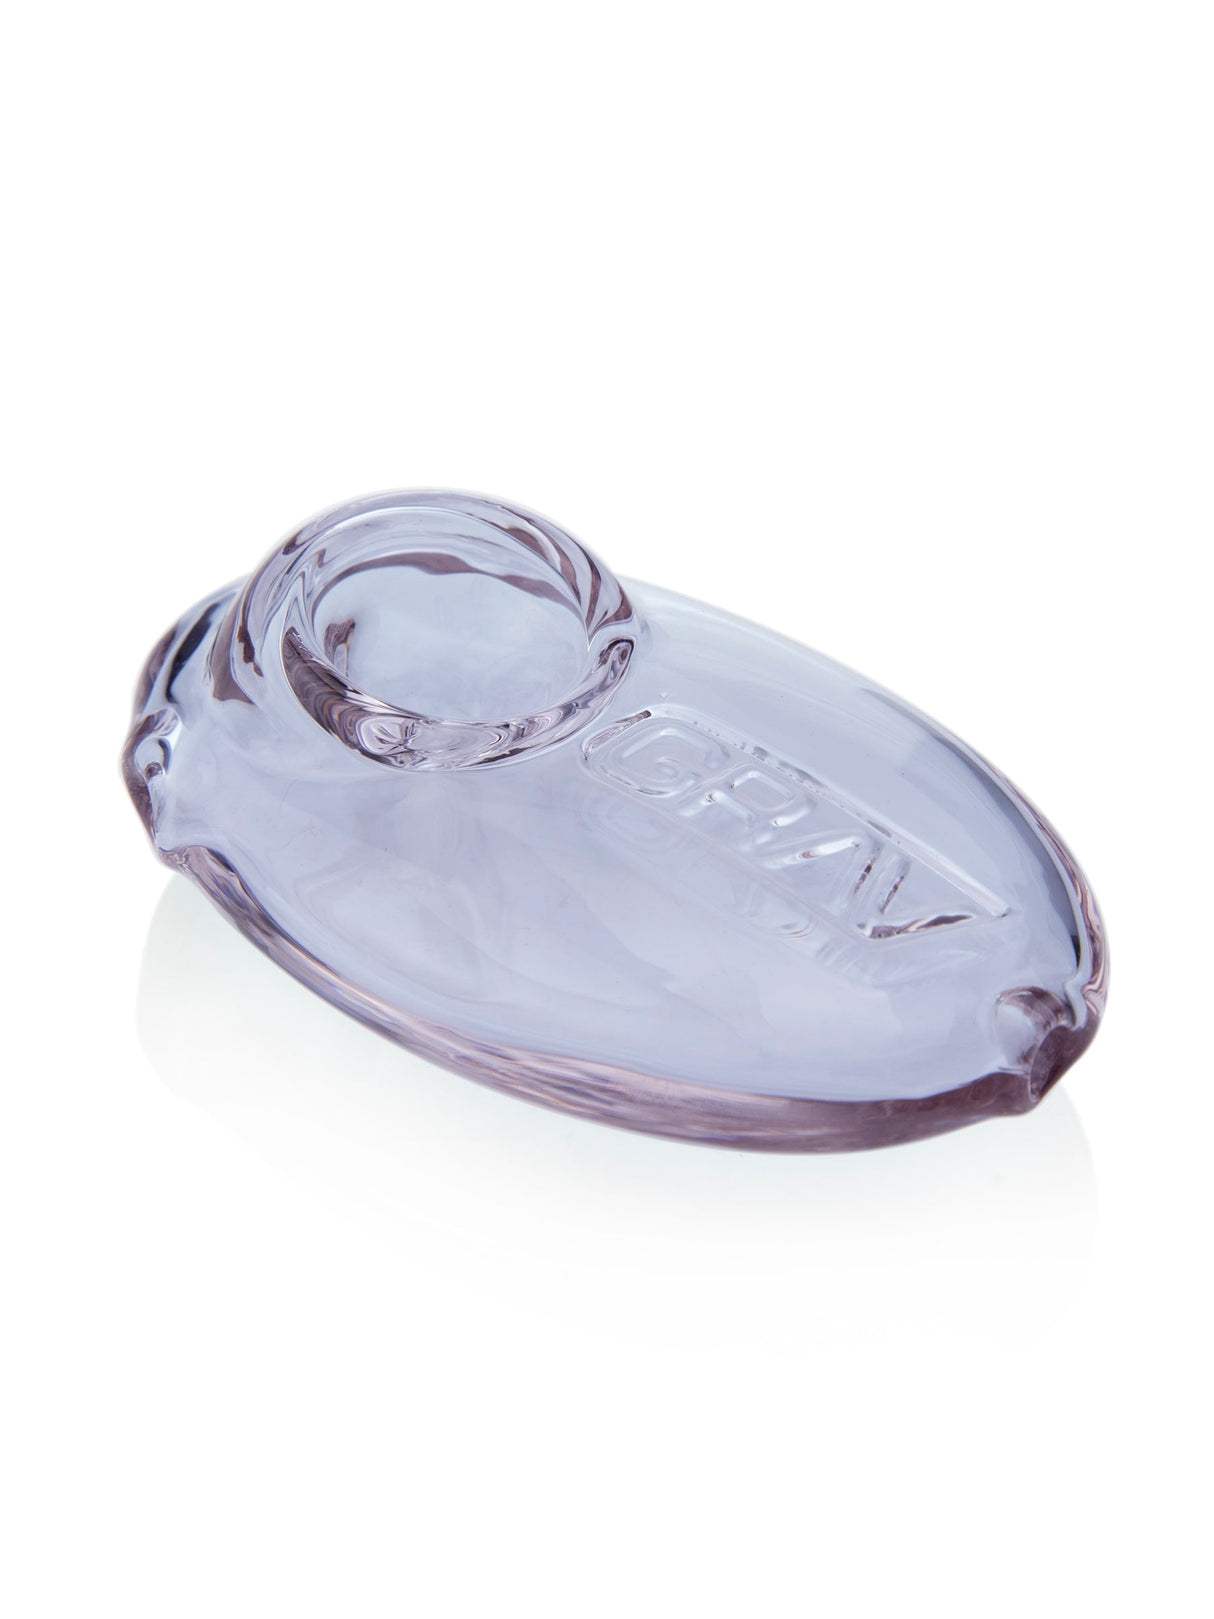 GRAV Pebble Spoon in Lavender - Compact Borosilicate Glass Hand Pipe for Dry Herbs, Side View